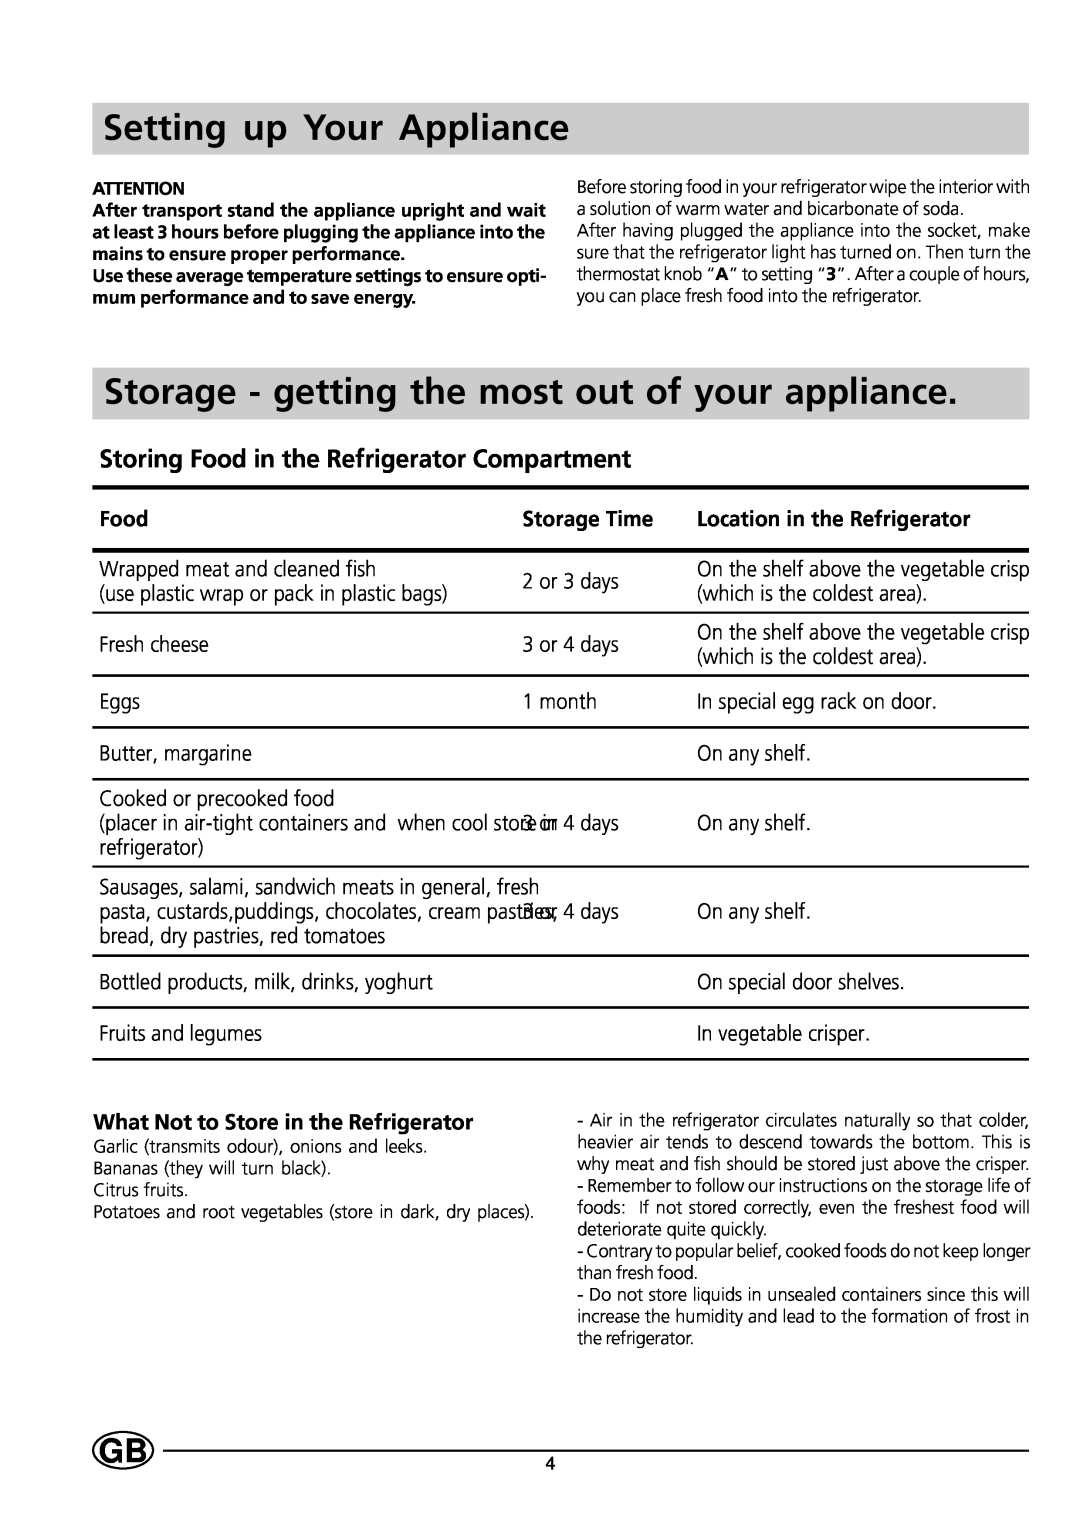 Indesit RG1140 manual Setting up Your Appliance, Storage - getting the most out of your appliance 